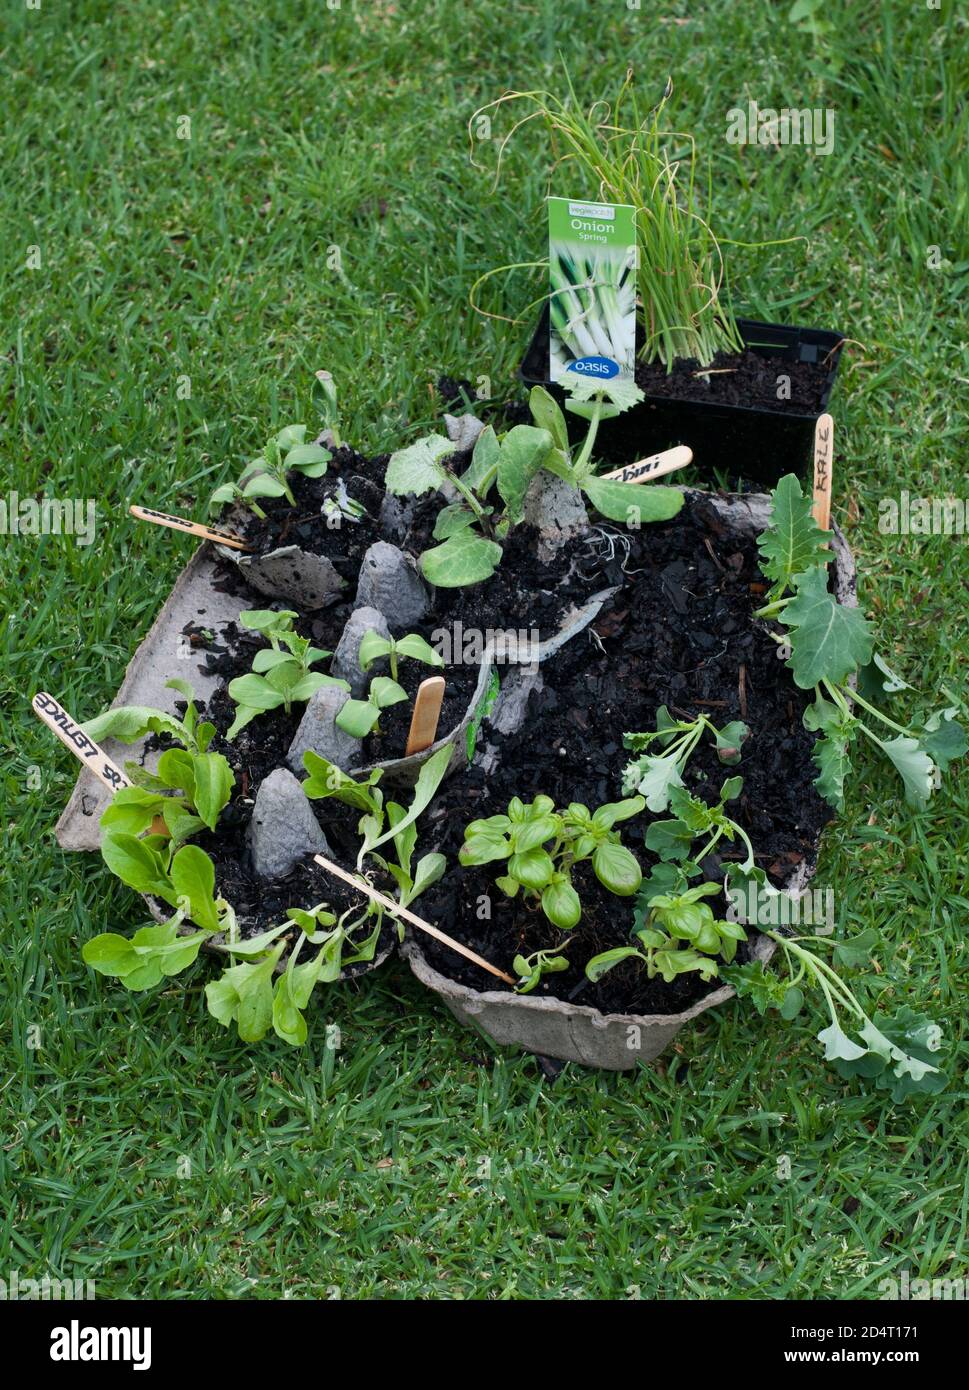 Vegetable seedlings ready to be planted in Melbourne, Australia. The 2020 COVID-19 lockdown triggered a boom in home cultivation of edible gardens. Stock Photo